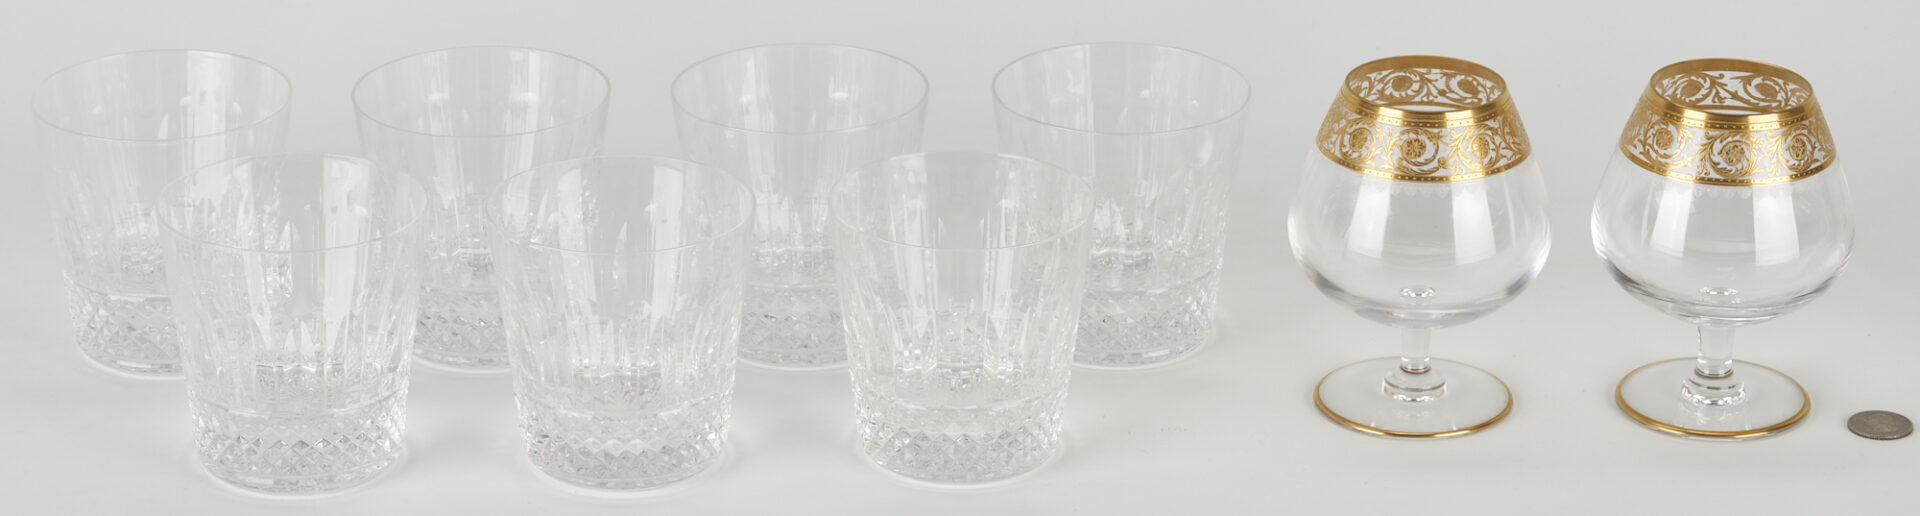 Lot 60: 9 pcs. St Louis Crystal, incl. Tommy DOF Glasses & Thistle Snifters